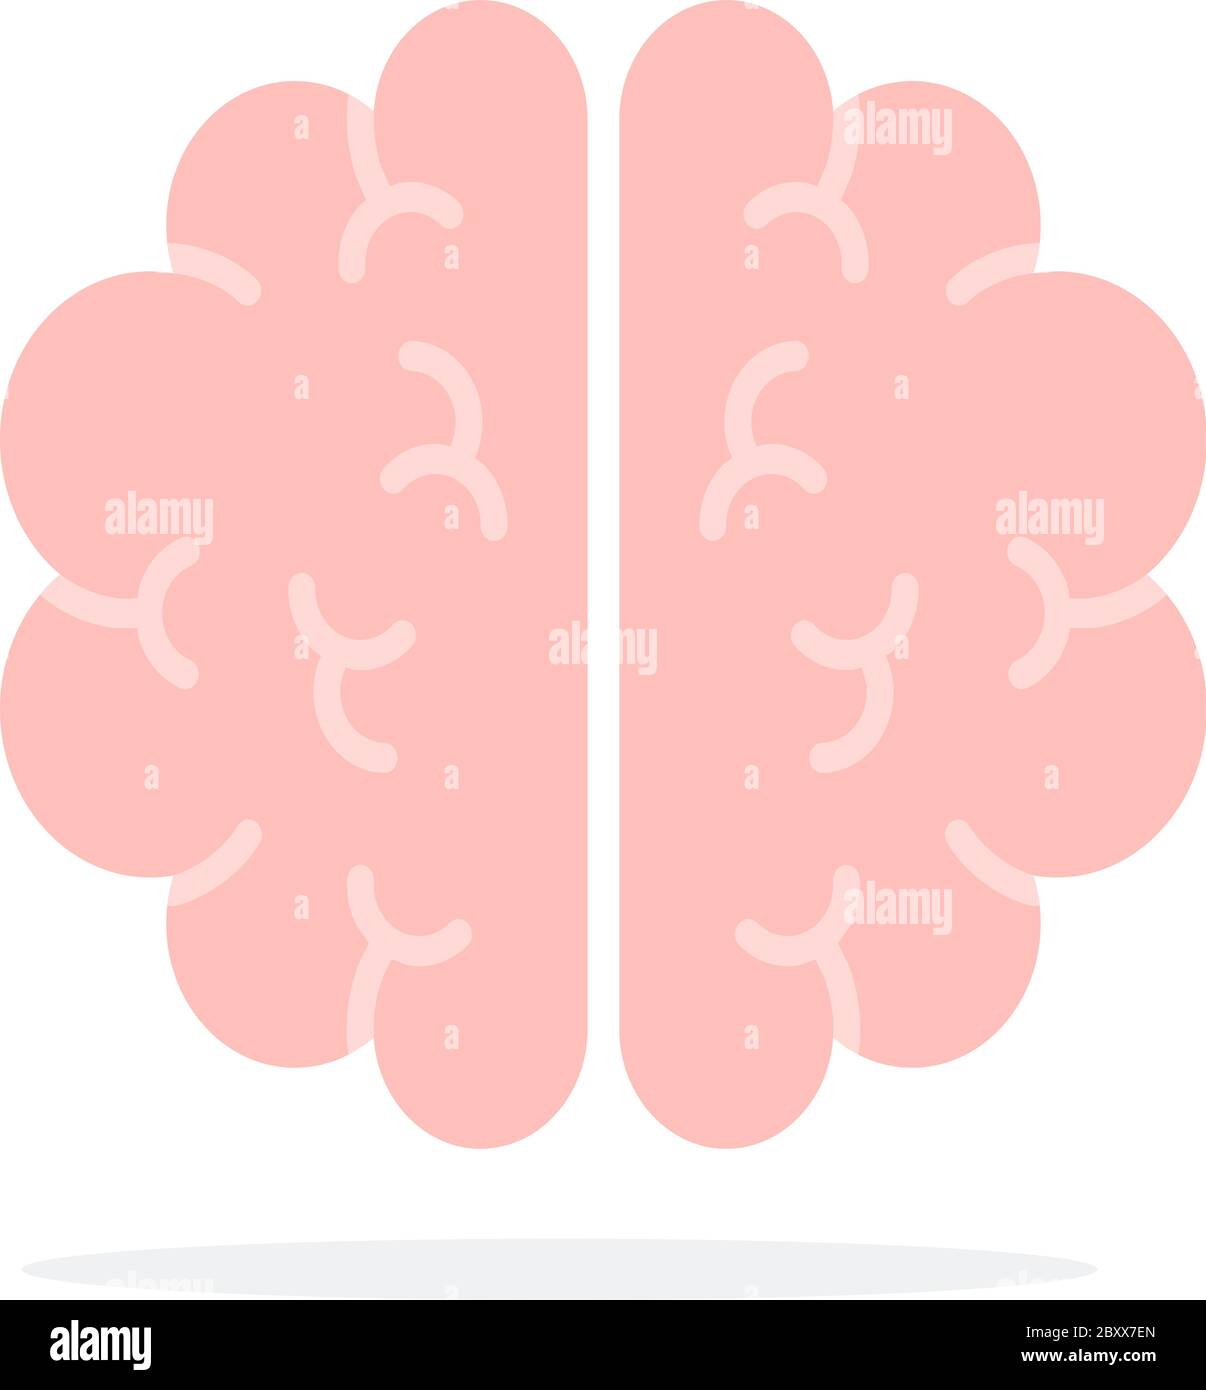 Human brain vector flat material design isolated object on white background. Stock Vector